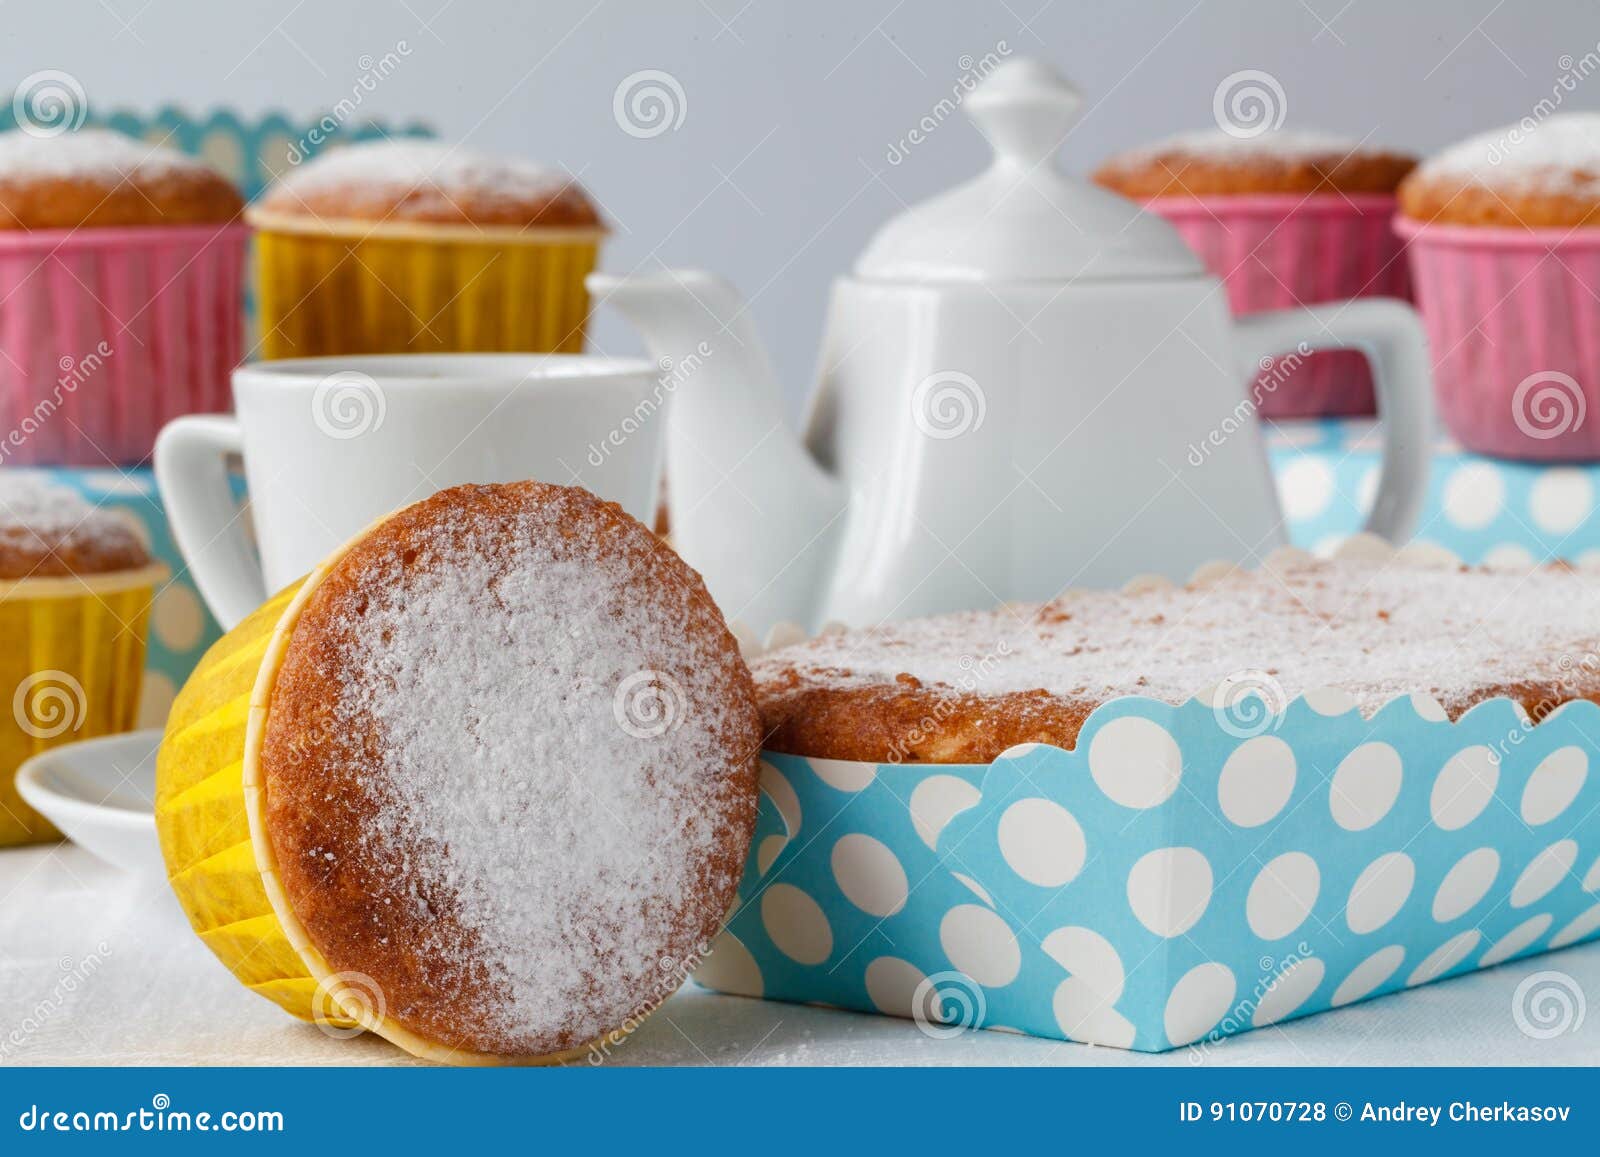 teaparty, sweet muffins and tea.